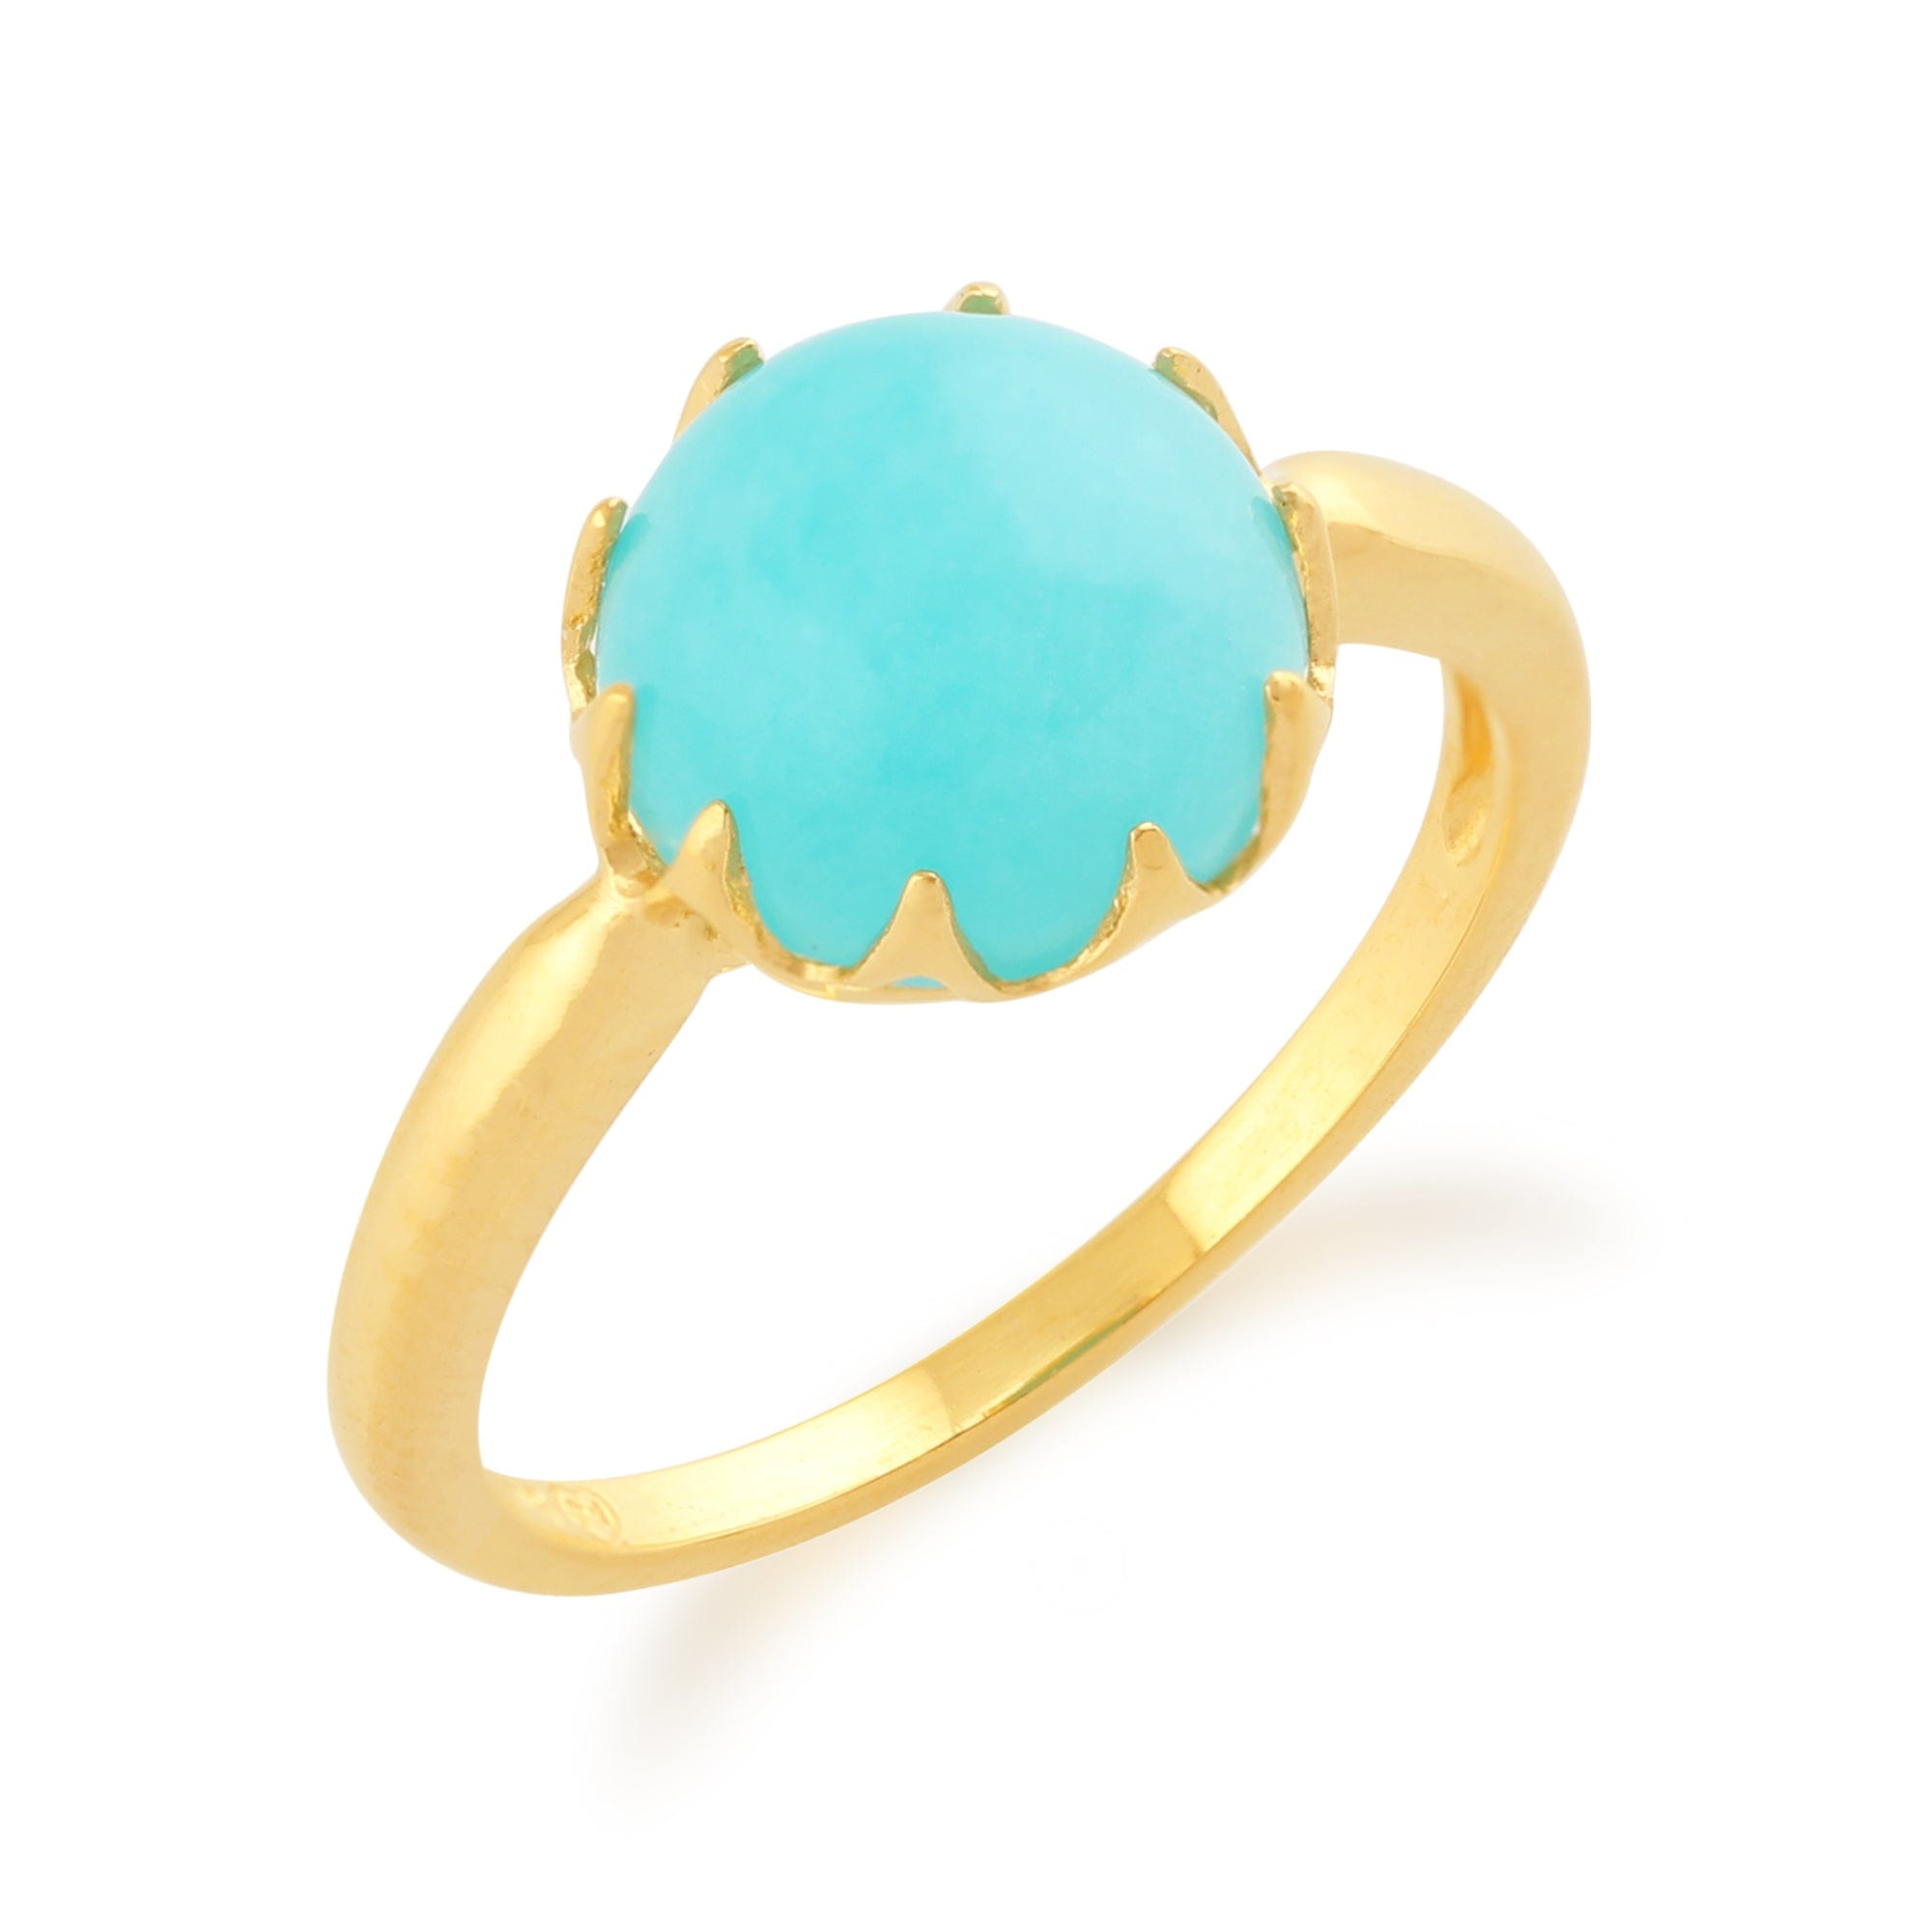 271R016702925 Amazonite 'Calo' Pastel Ring in 9ct Yellow Gold Plated Sterling Silver 2